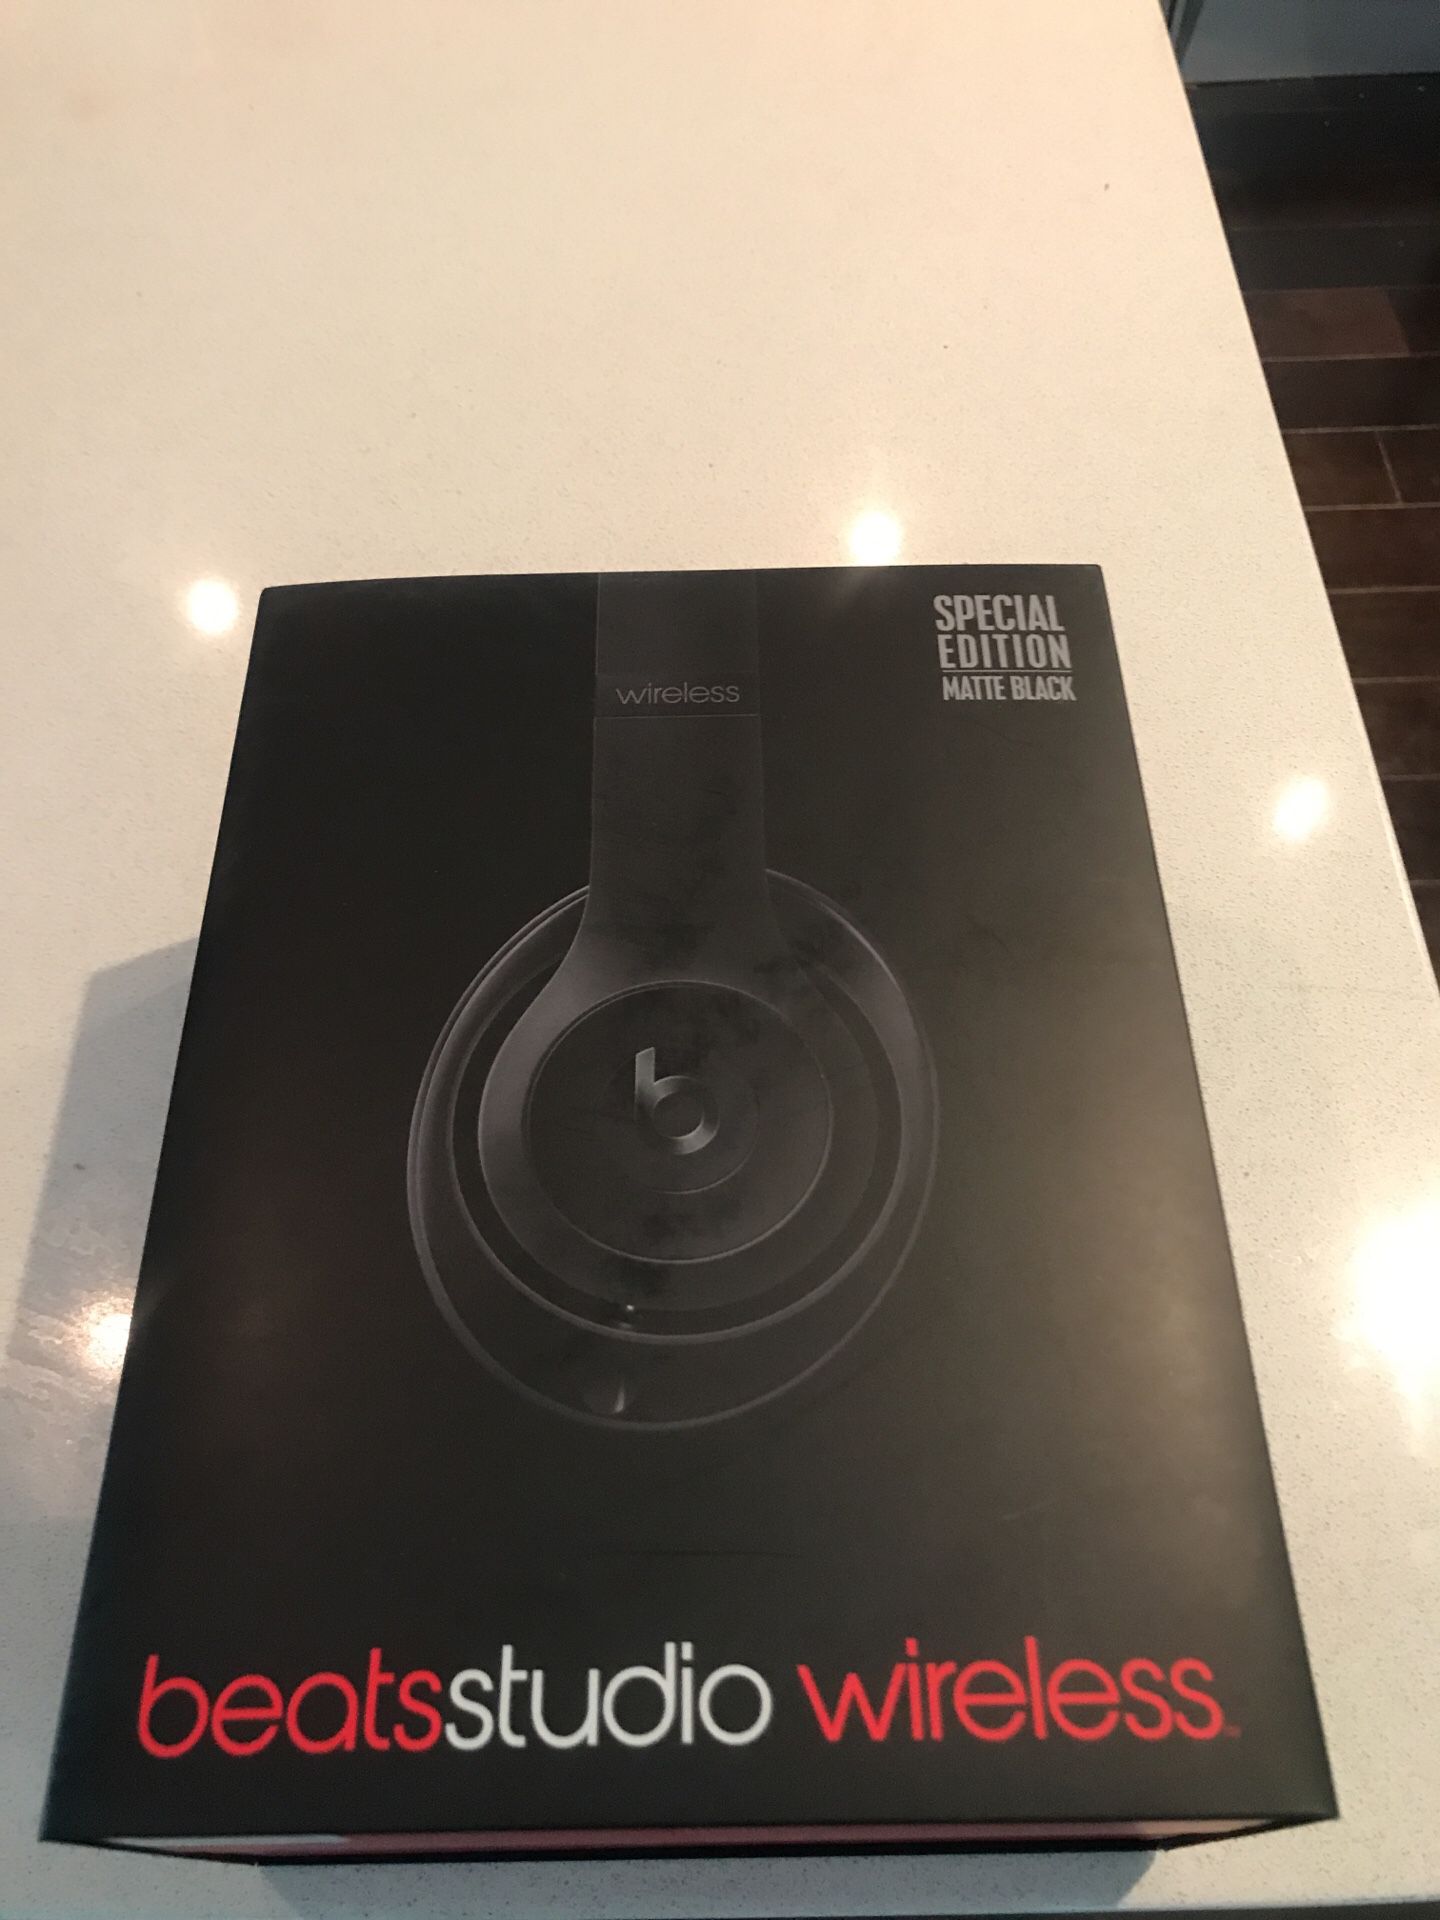 Beats Studio Wireless by Dr Dre. Special Edition Matte Black